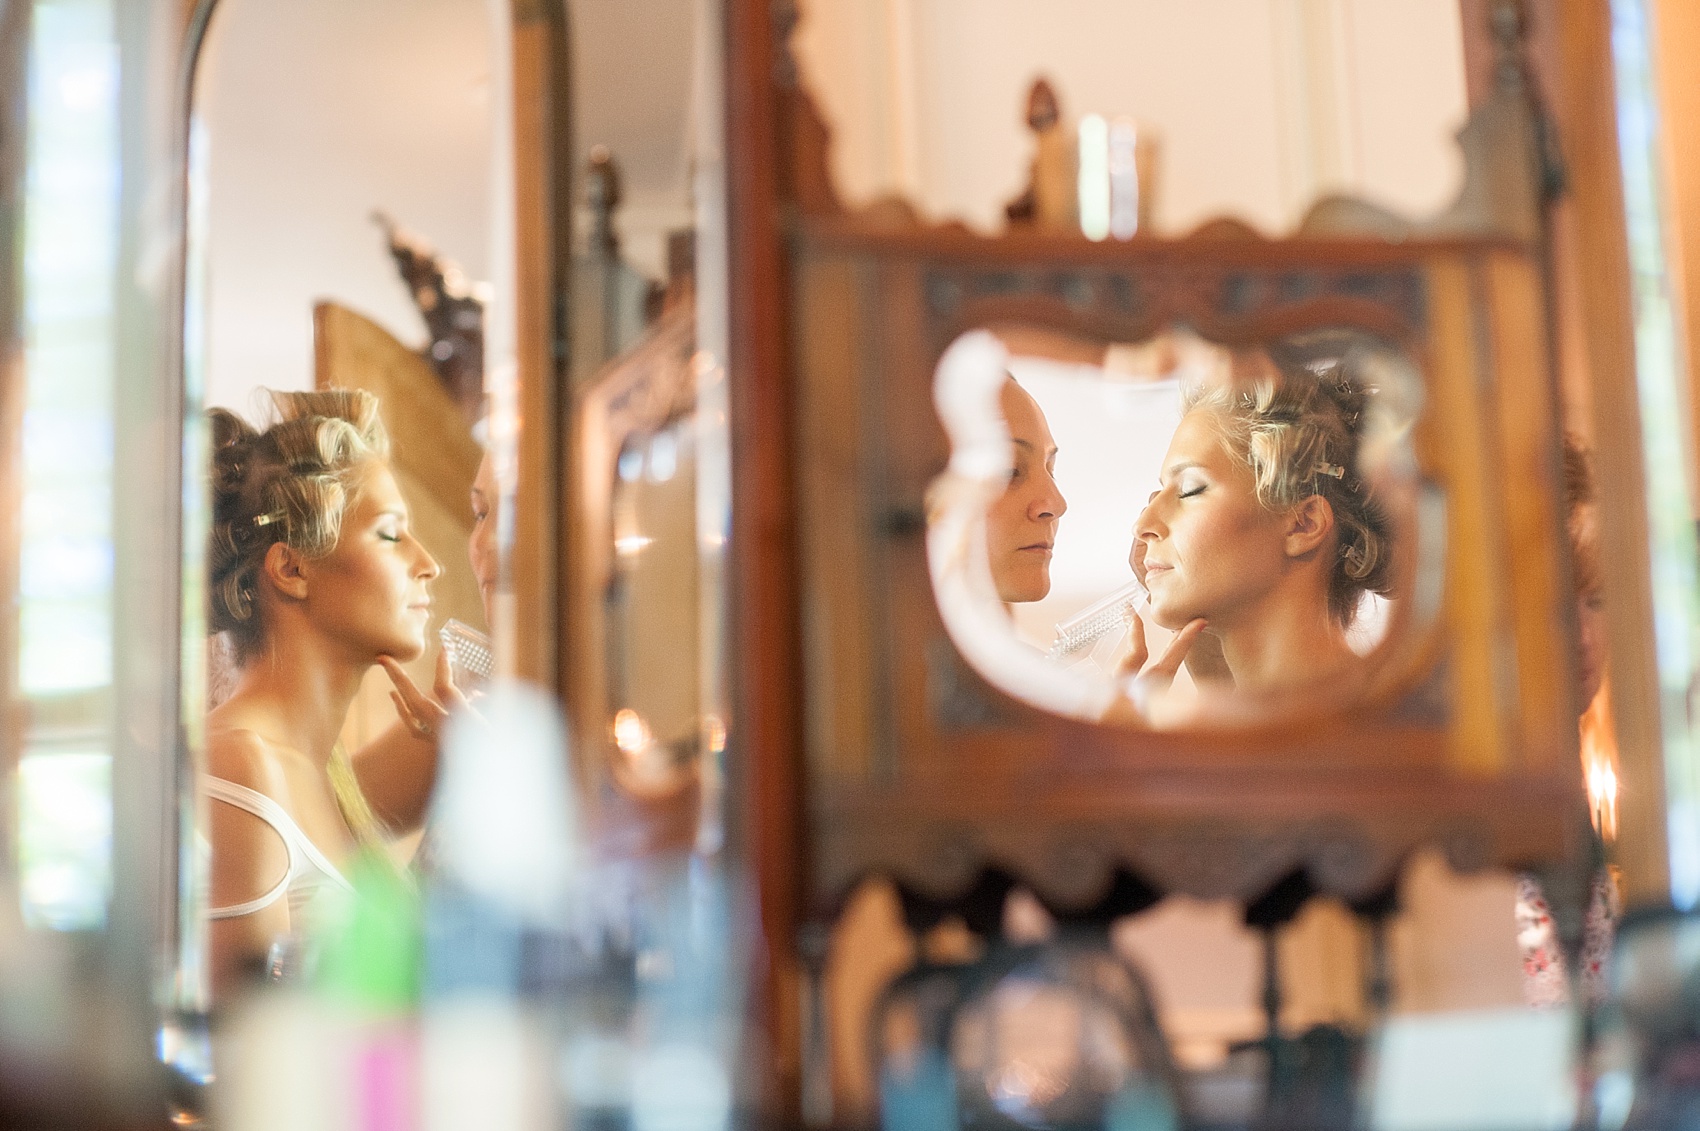 Bride prepares for her wedding day. Photos by Mikkel Paige Photography.